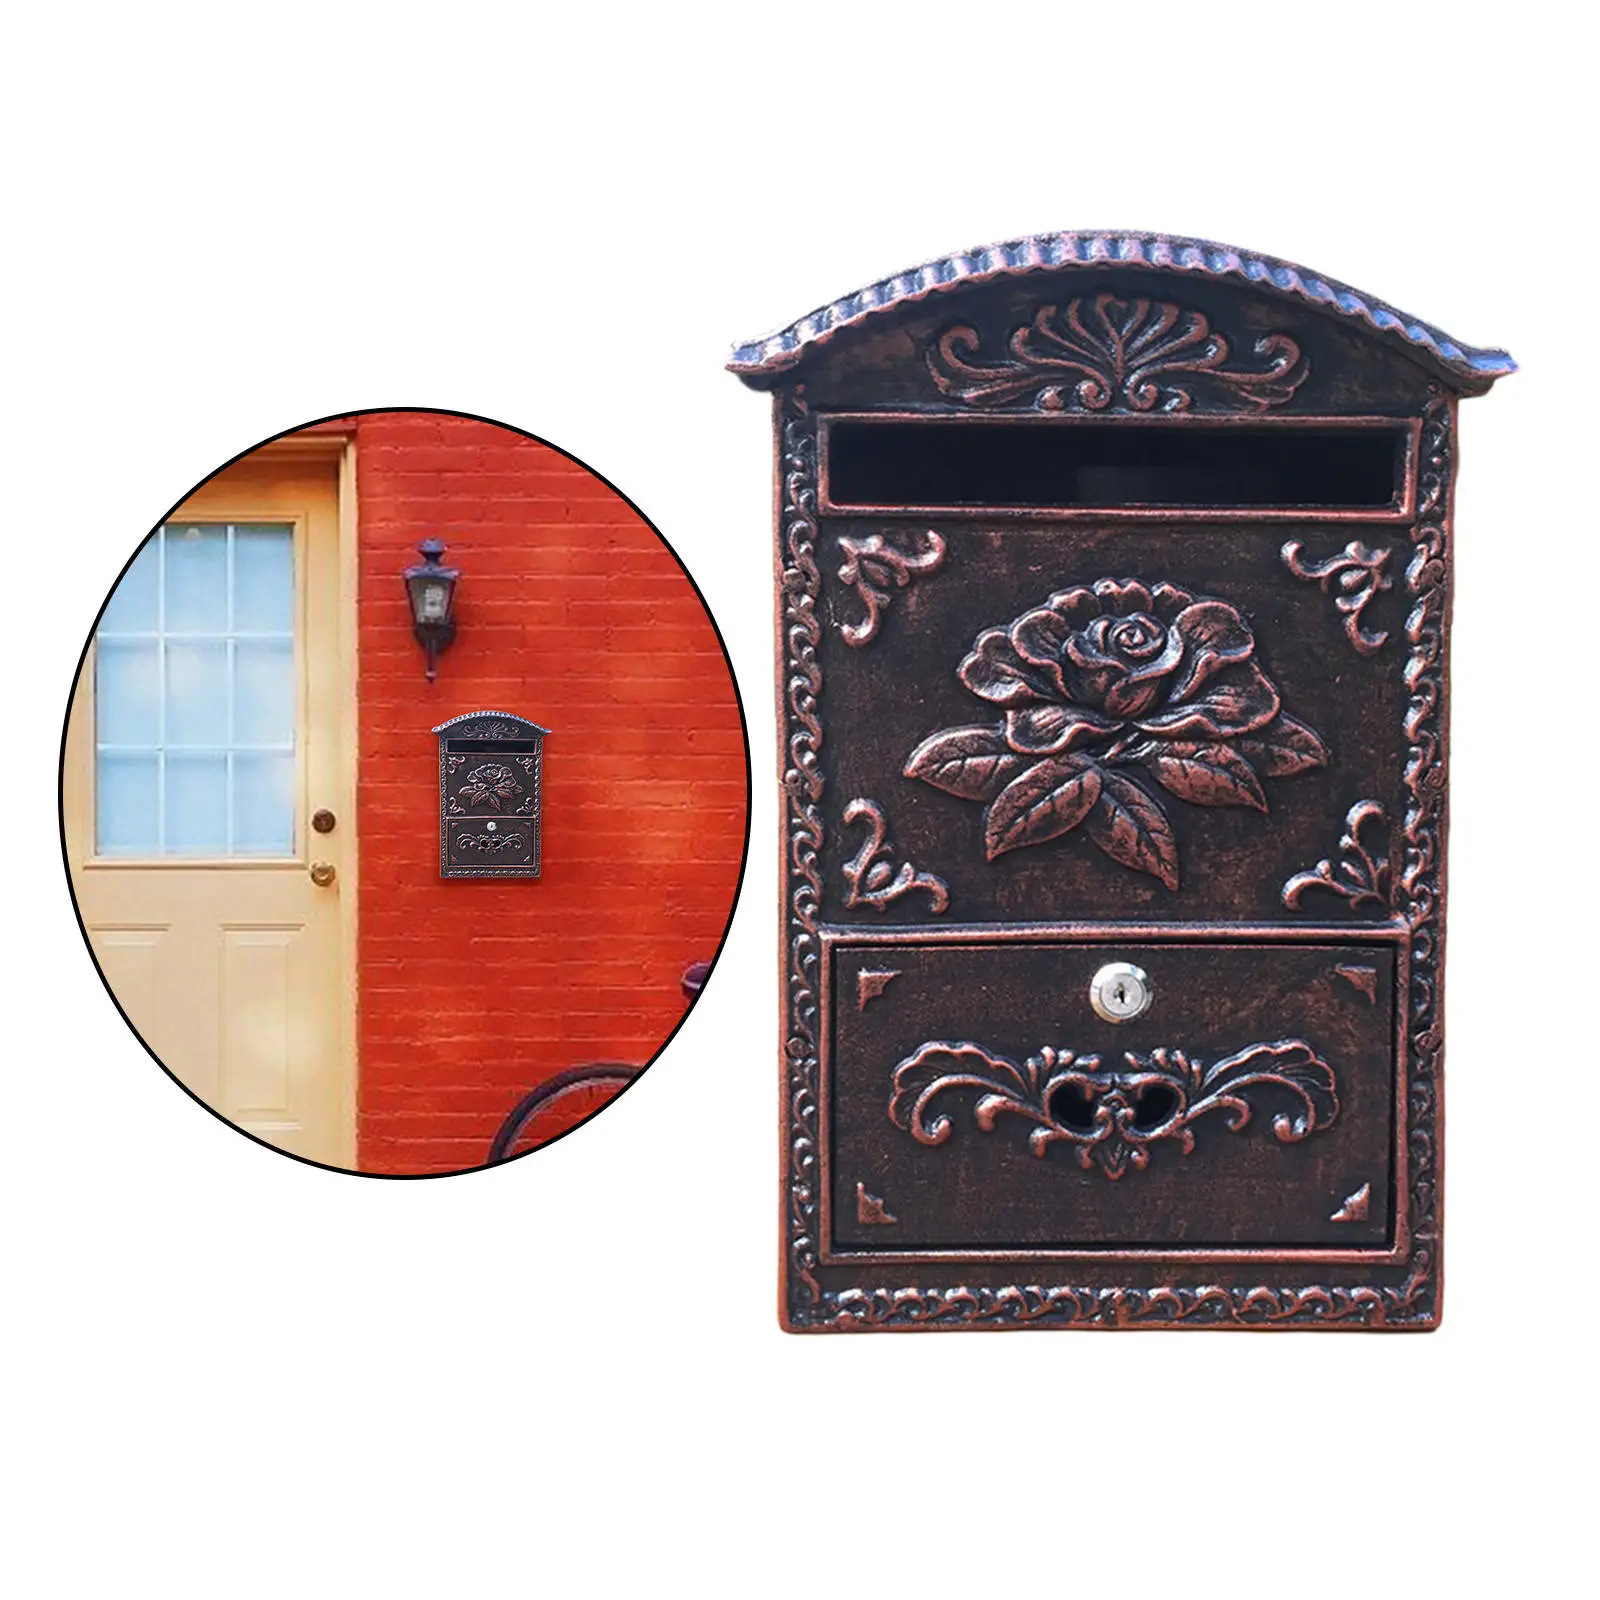 Wall-Mount Post Letter Box Locking Theft Security Decorative Vintage Style Mailbox for Outside Front Door Post Garden Newspaper